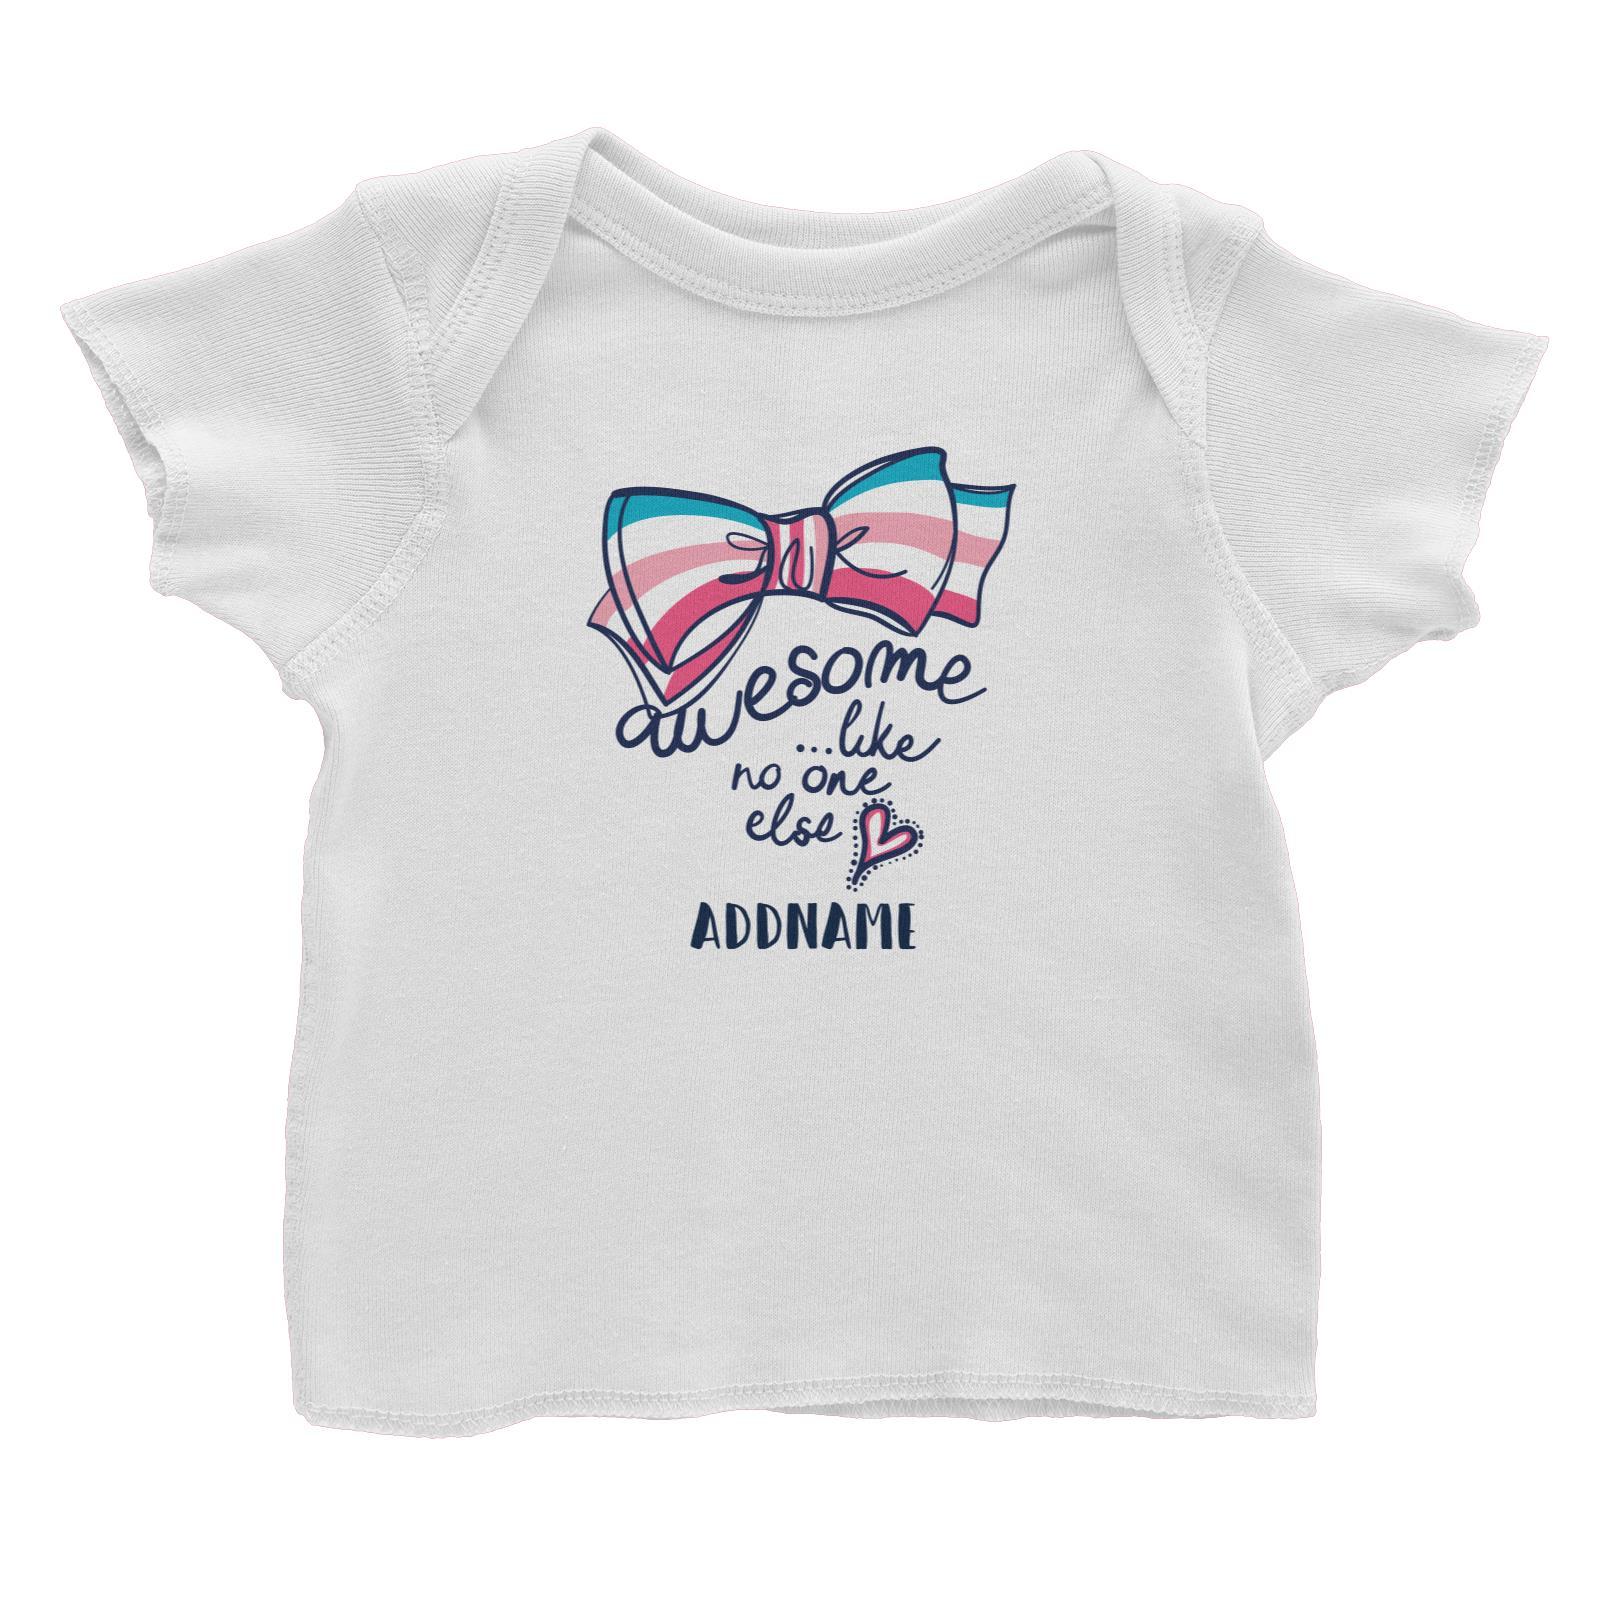 Cool Vibrant Series Awesome Like No One Else Ribbon Addname Baby T-Shirt